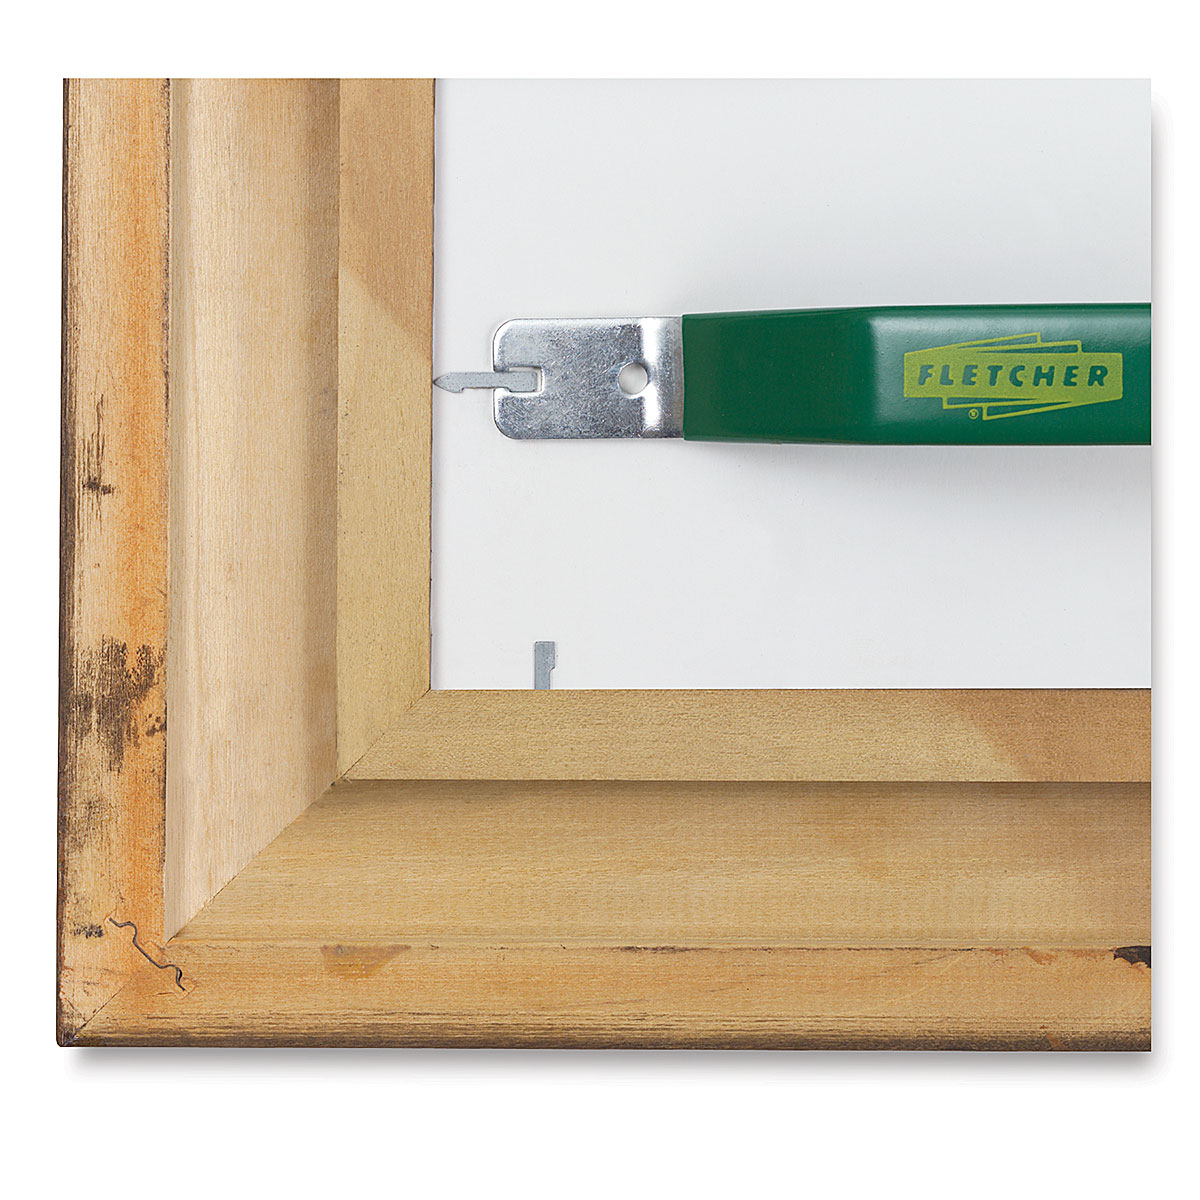 Picture-Framing Point Driver - Lee Valley Tools